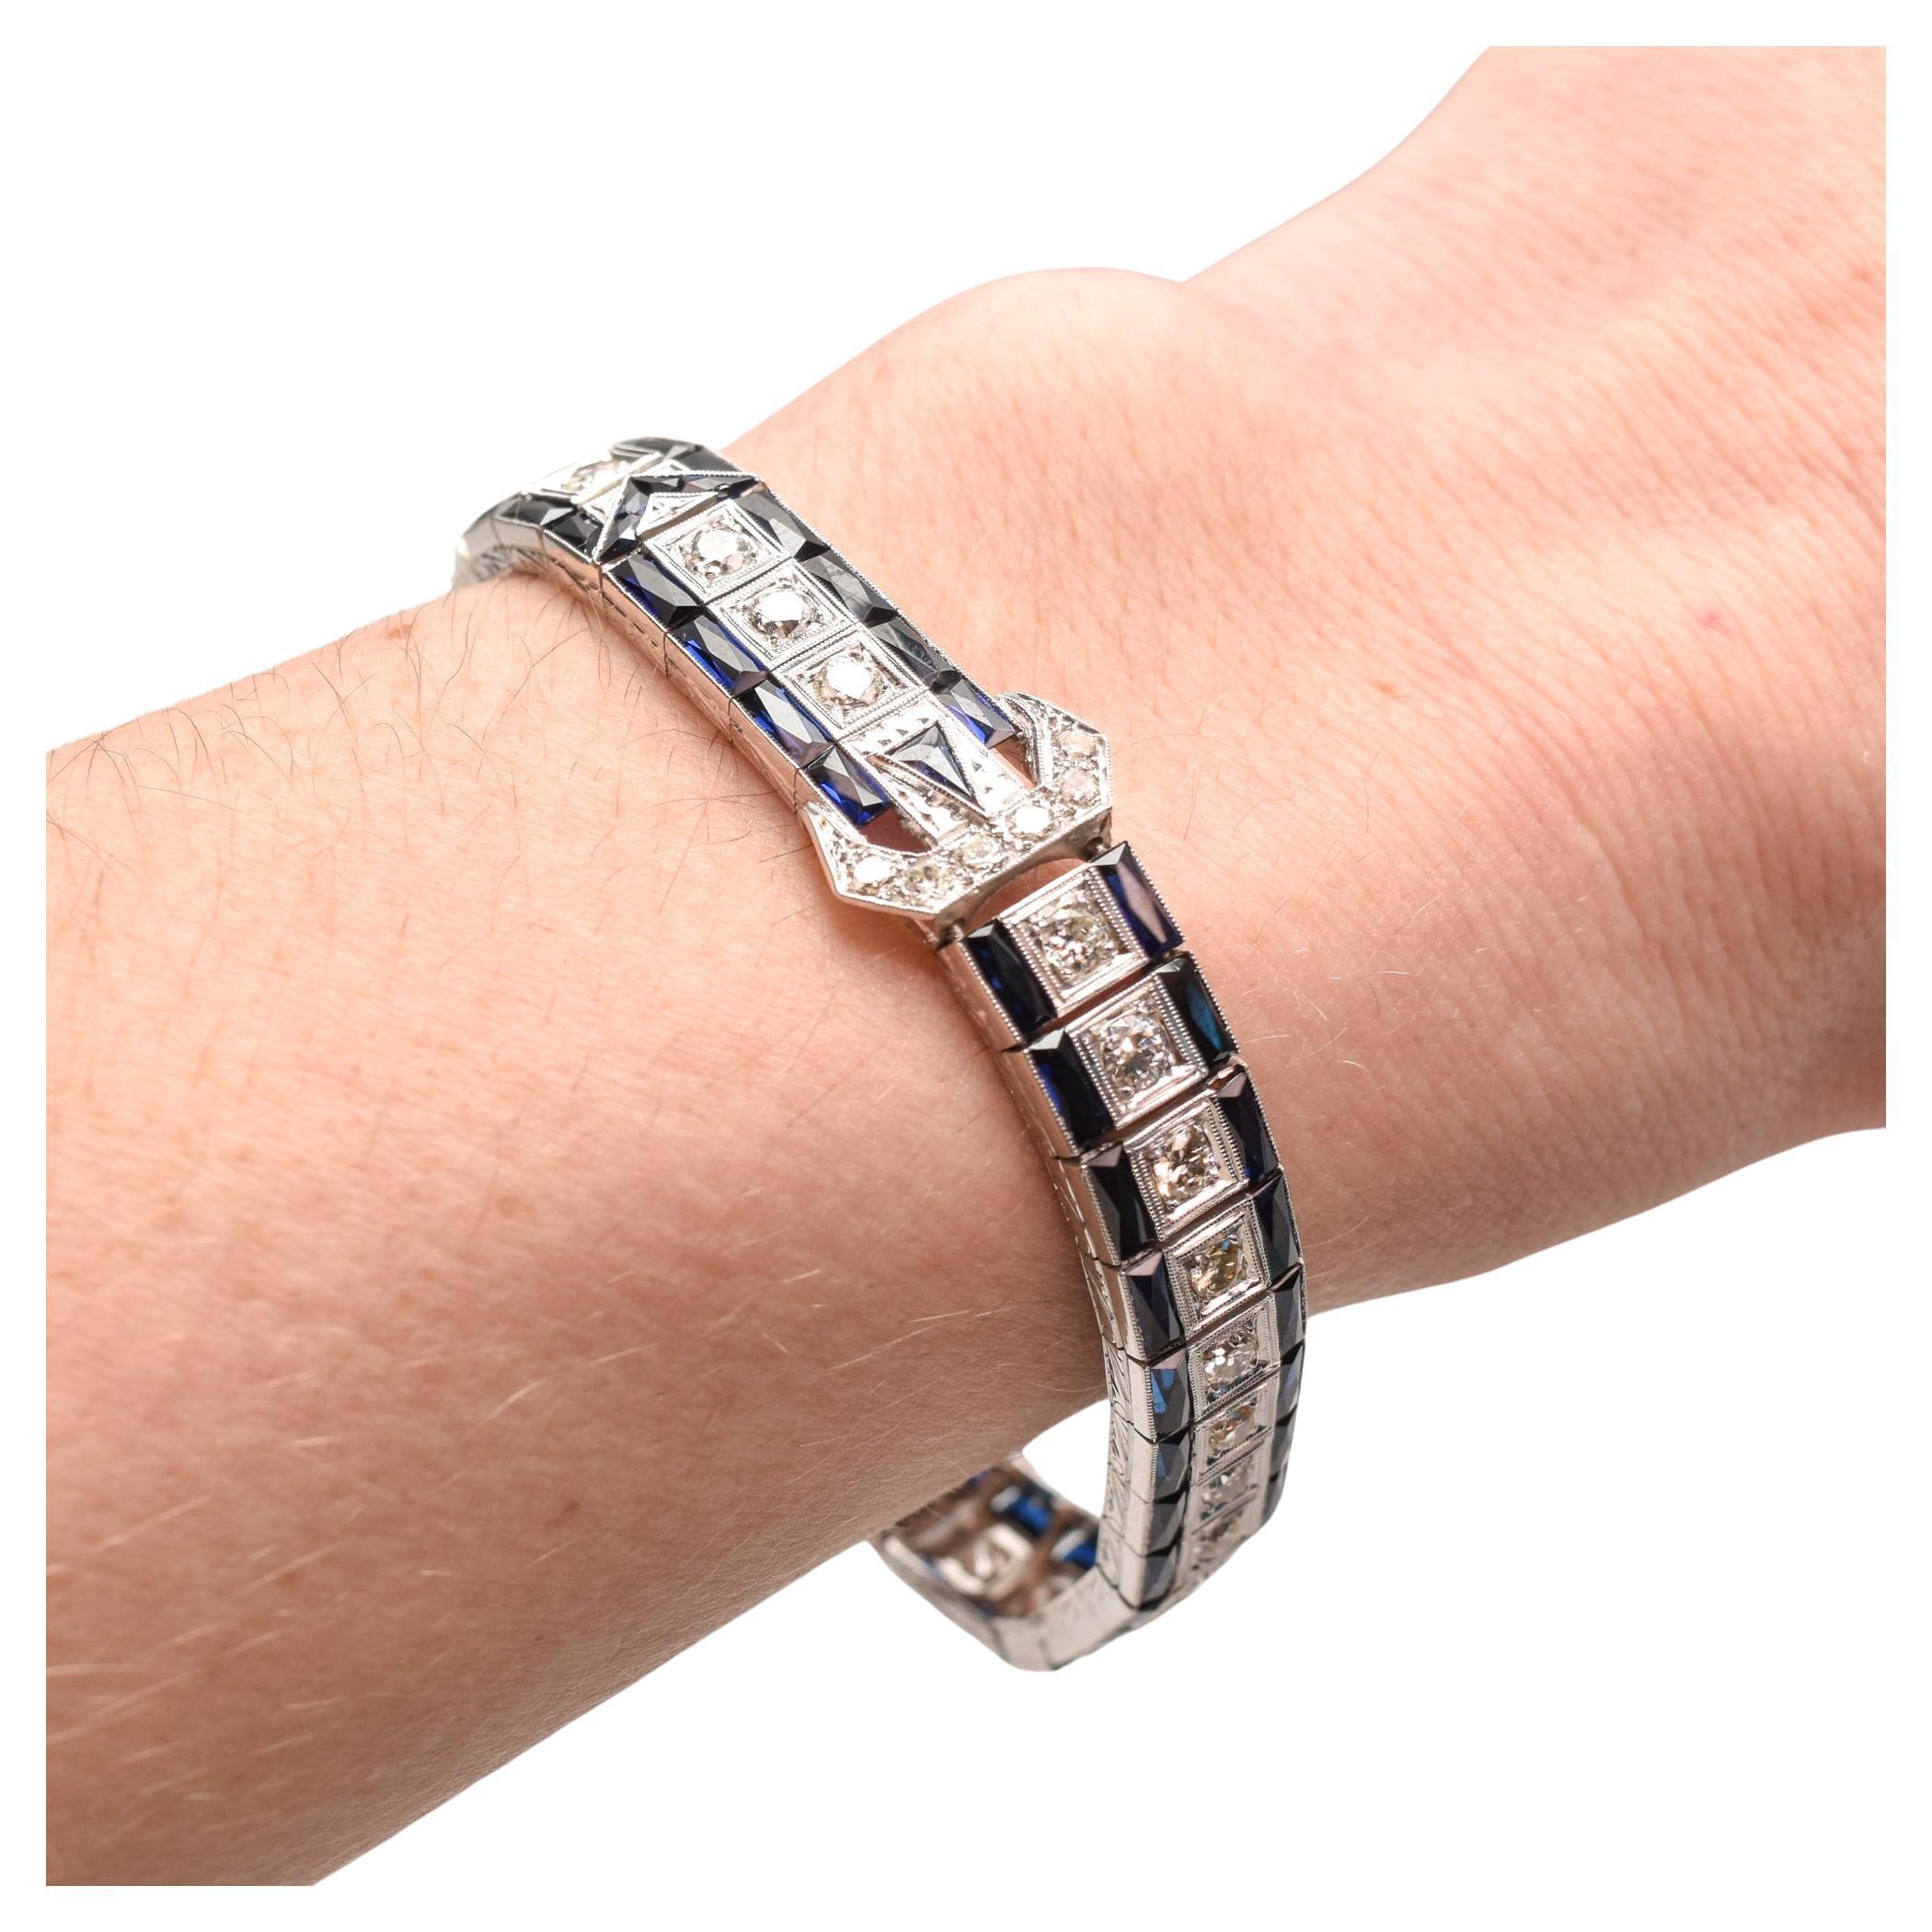 A stunning platinum diamond & sapphire belt link bracelet. Features a dazzling single row of 32 natural OEC diamonds bordered by custom french baguette sapphires with a diamond and sapphire belt embellishment in the middle. The belt decoration